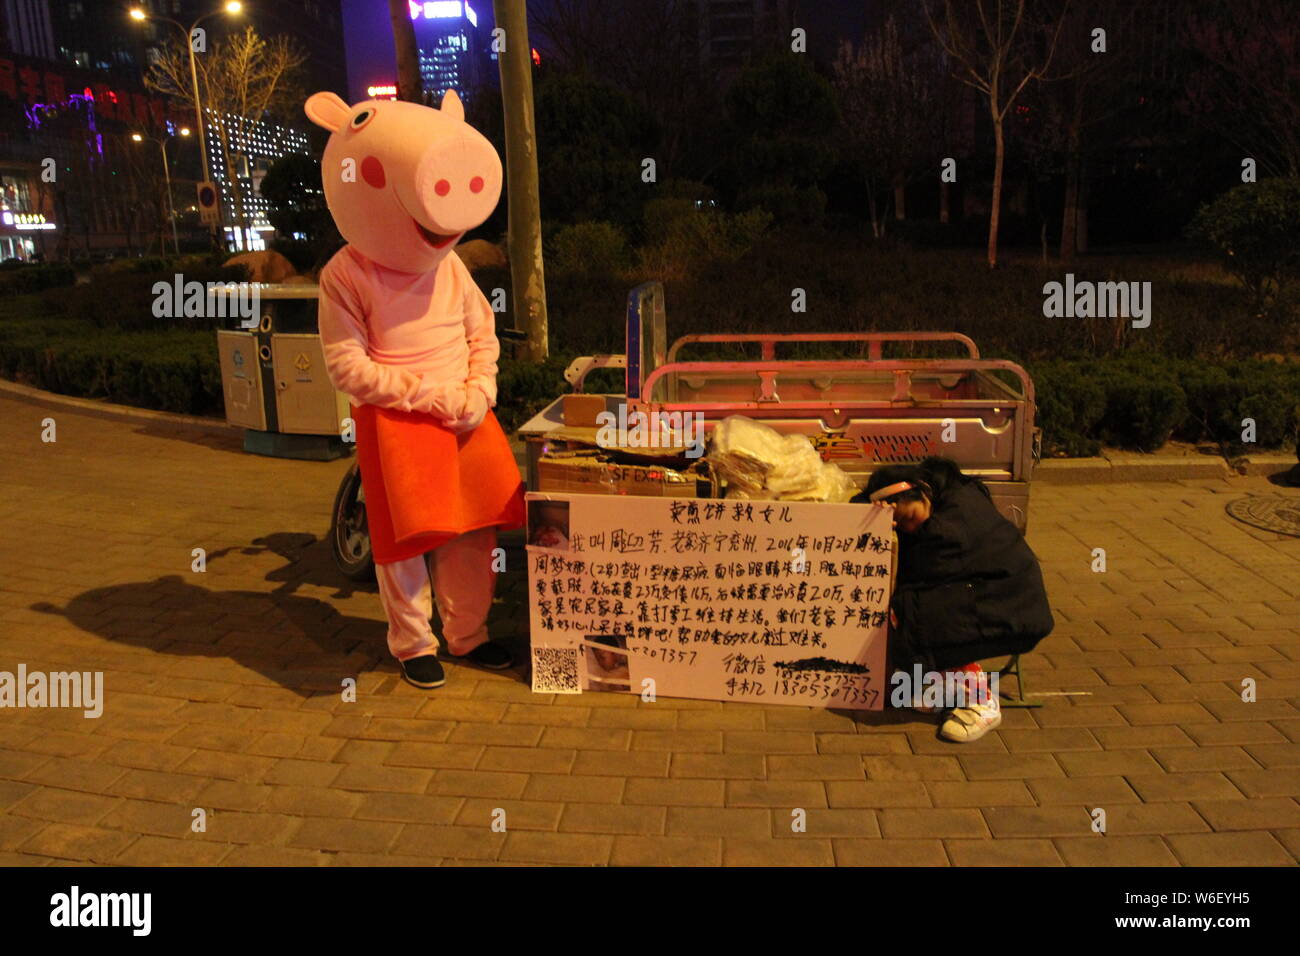 Chinese father Mr. Zhou, who is dressed up as Peppa Pig to raise money for the treatment of his three-year-old daughter with type 1 diabetes mellitus, Stock Photo